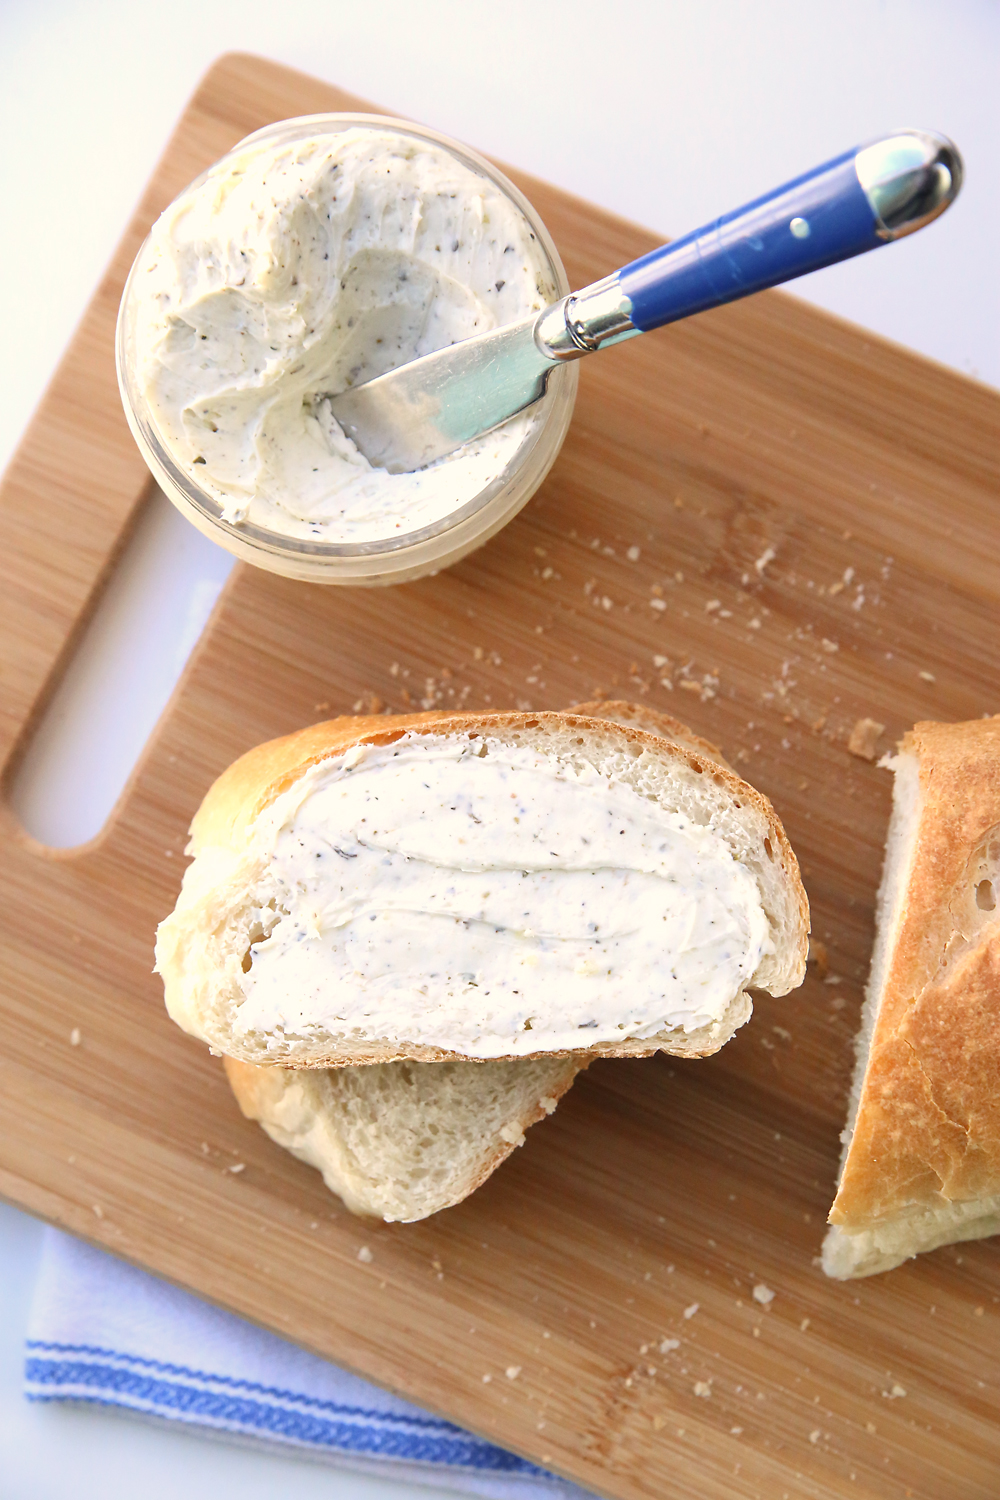 Learn how to make amazing homemade french bread with this easy recipe and video tutorial. It's so delicious! And try the herbed garlic butter too.